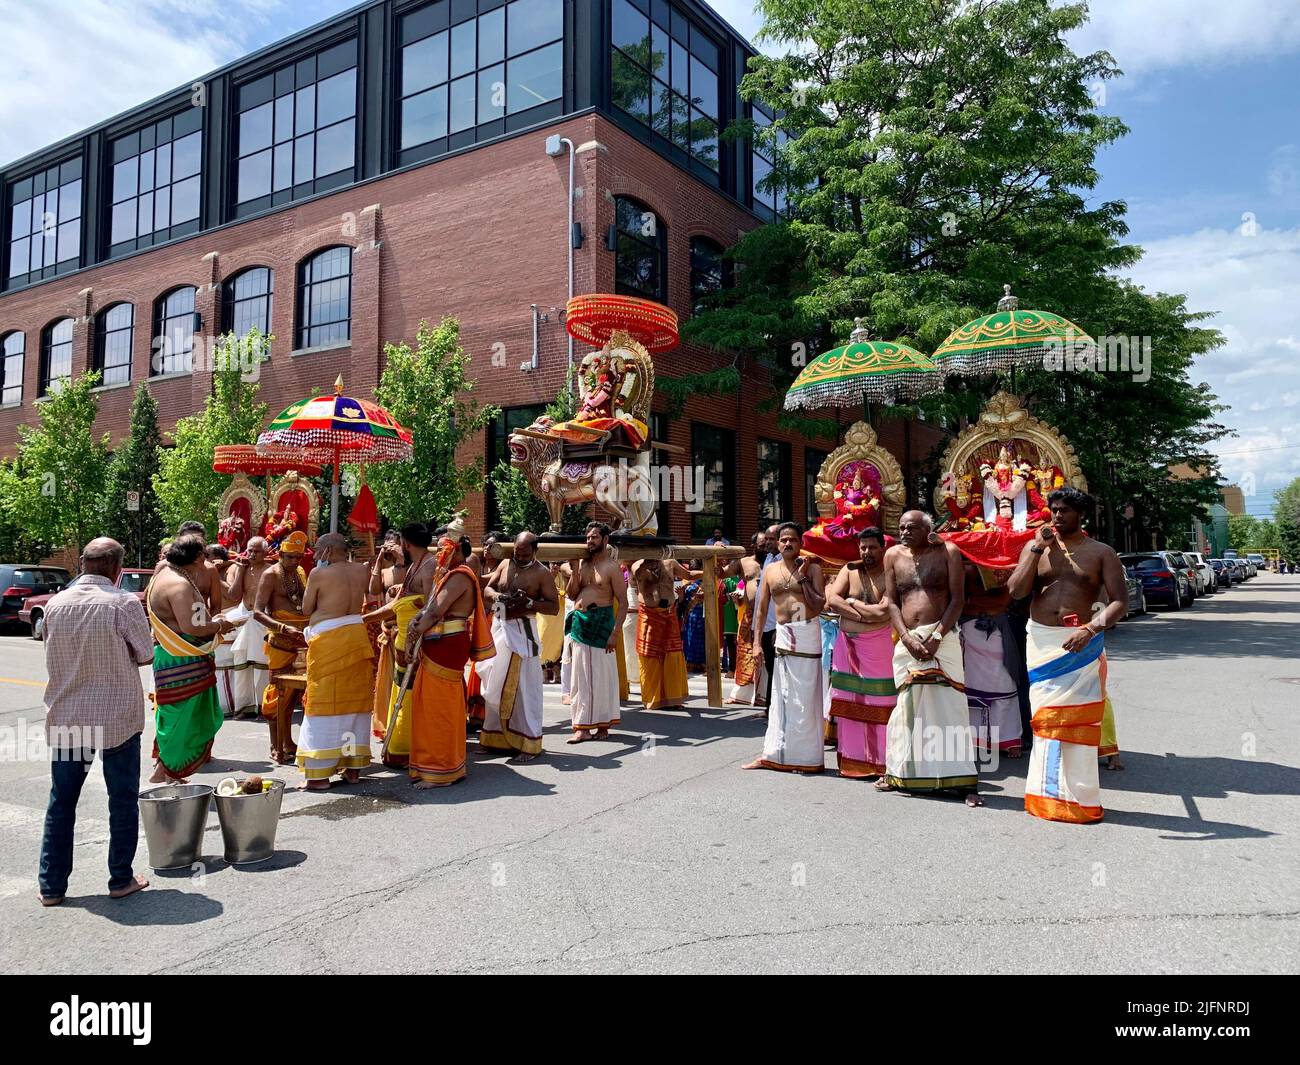 Hindu celebration at a South Asian Hindu Tamil temple in Park Extension Montreal Canada Stock Photo